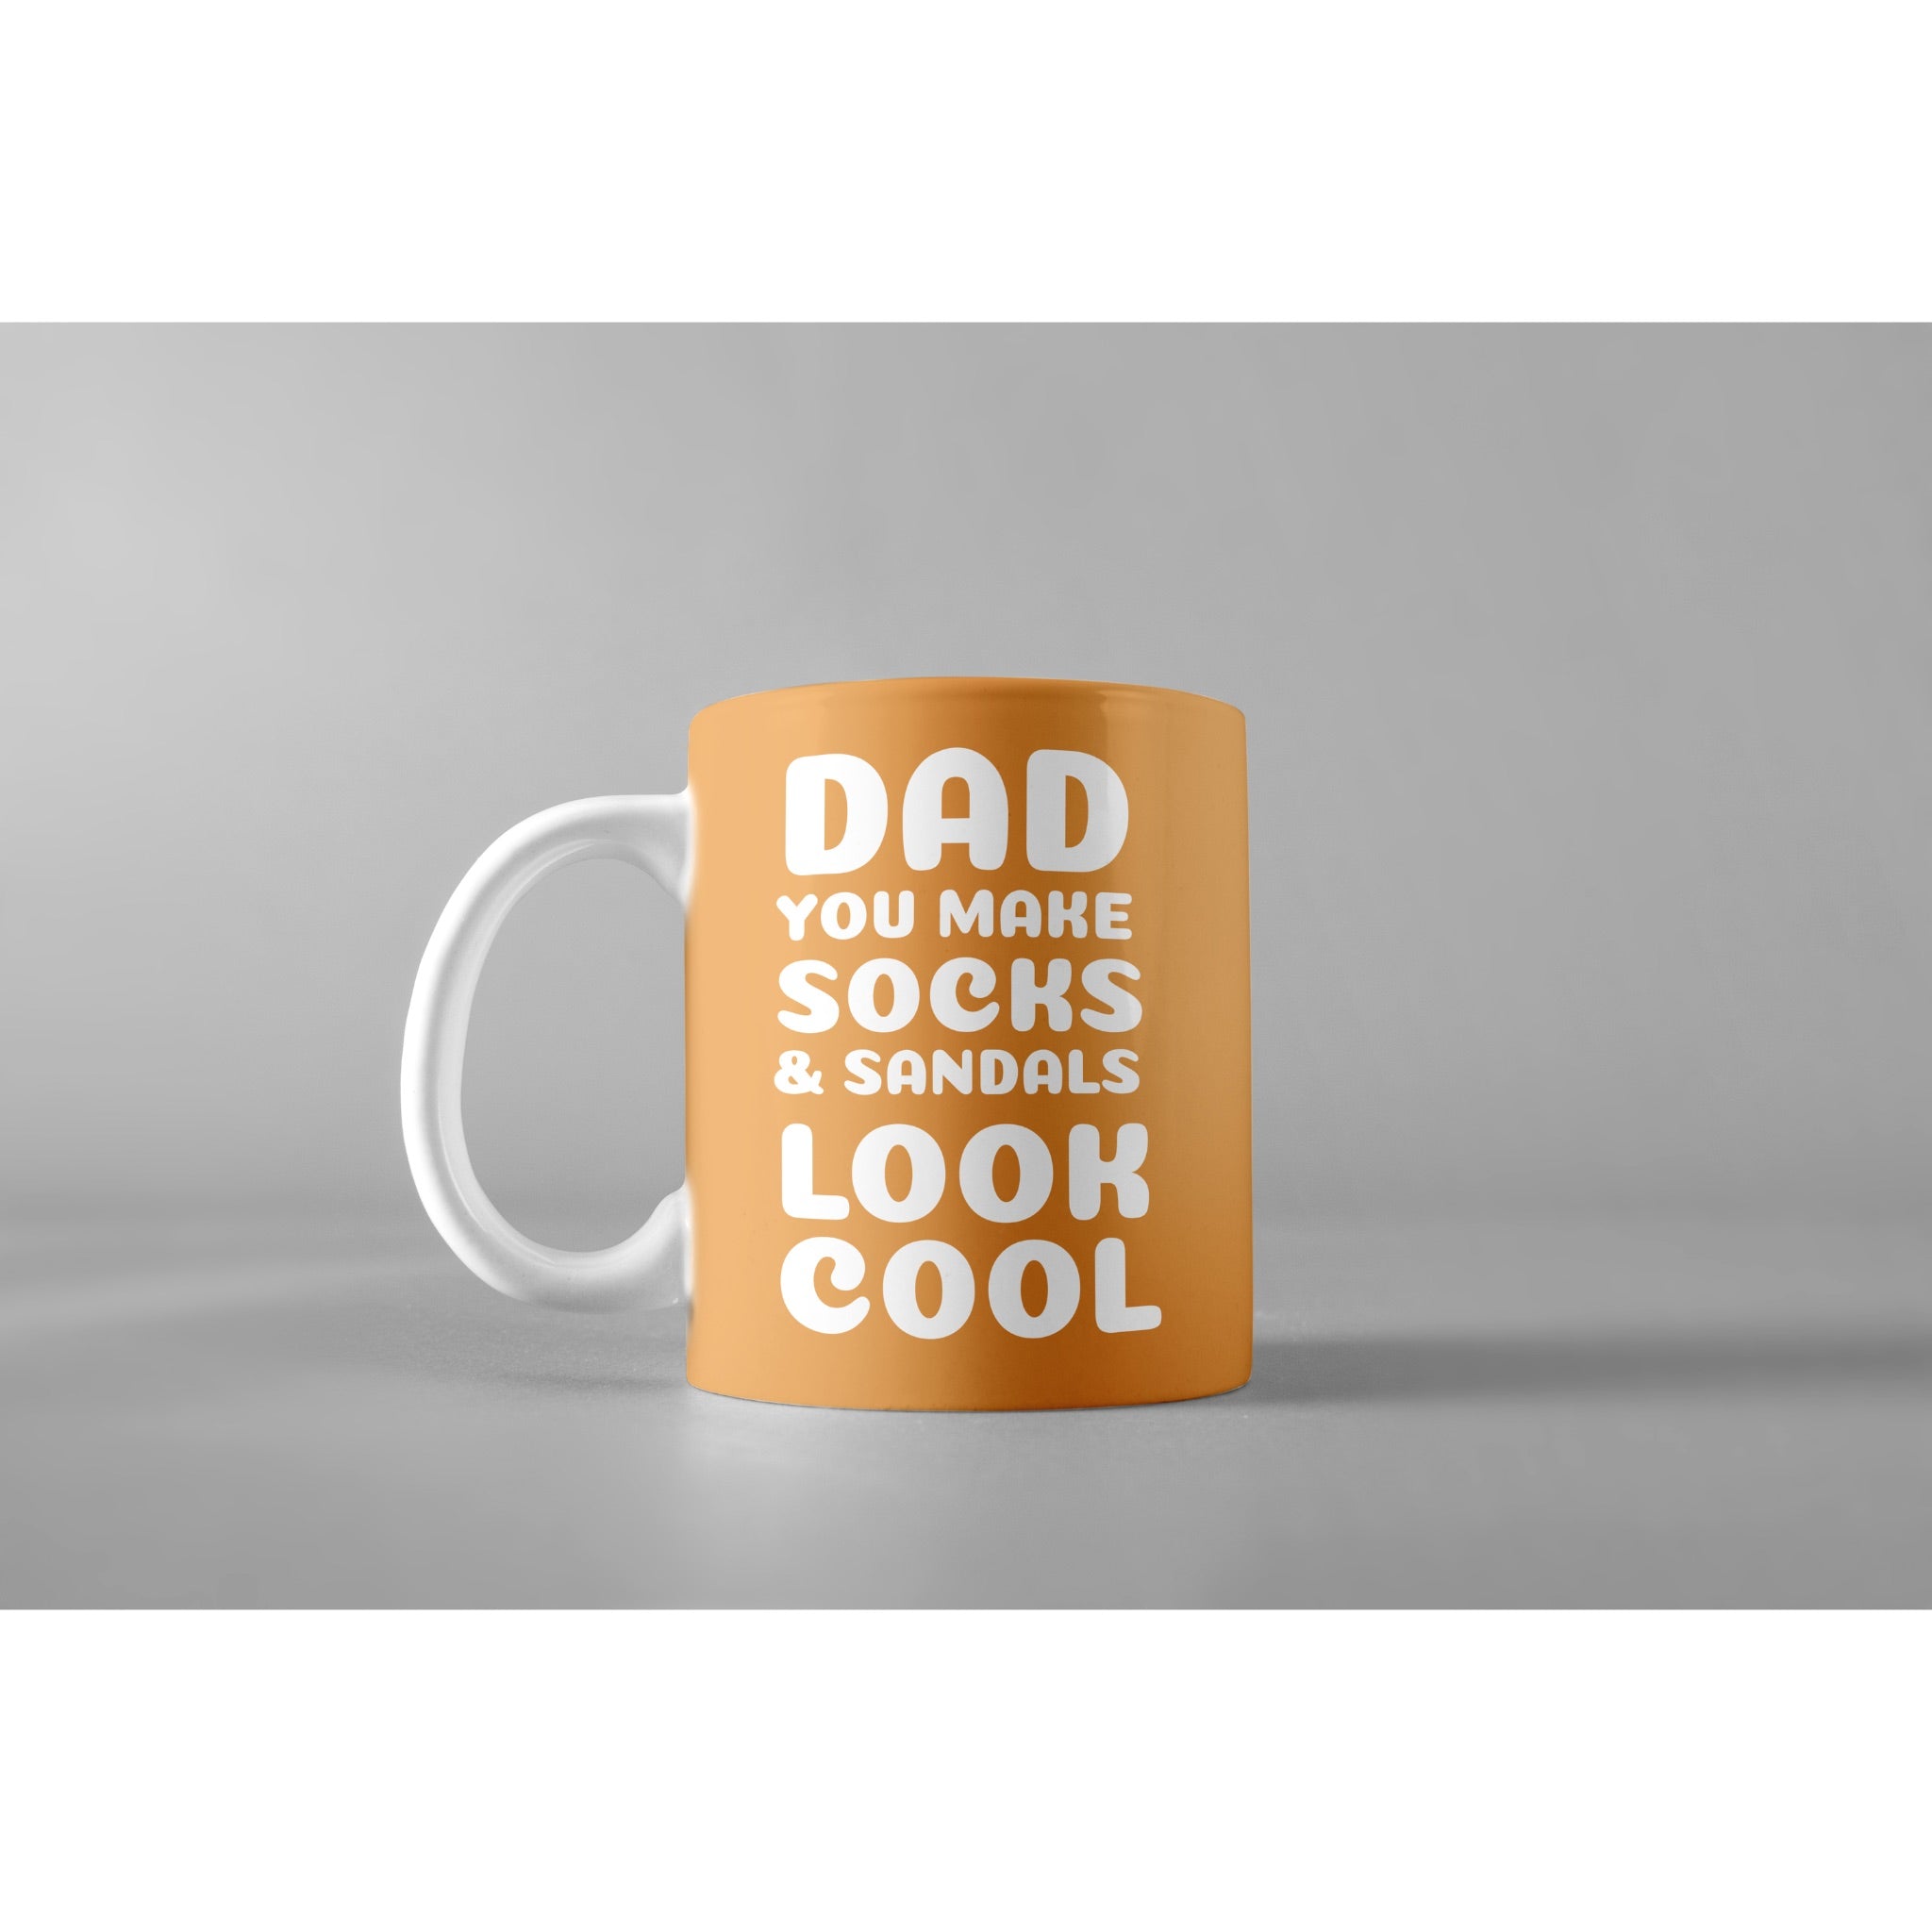 Dad Makes Sandals cool- Mugs for Father